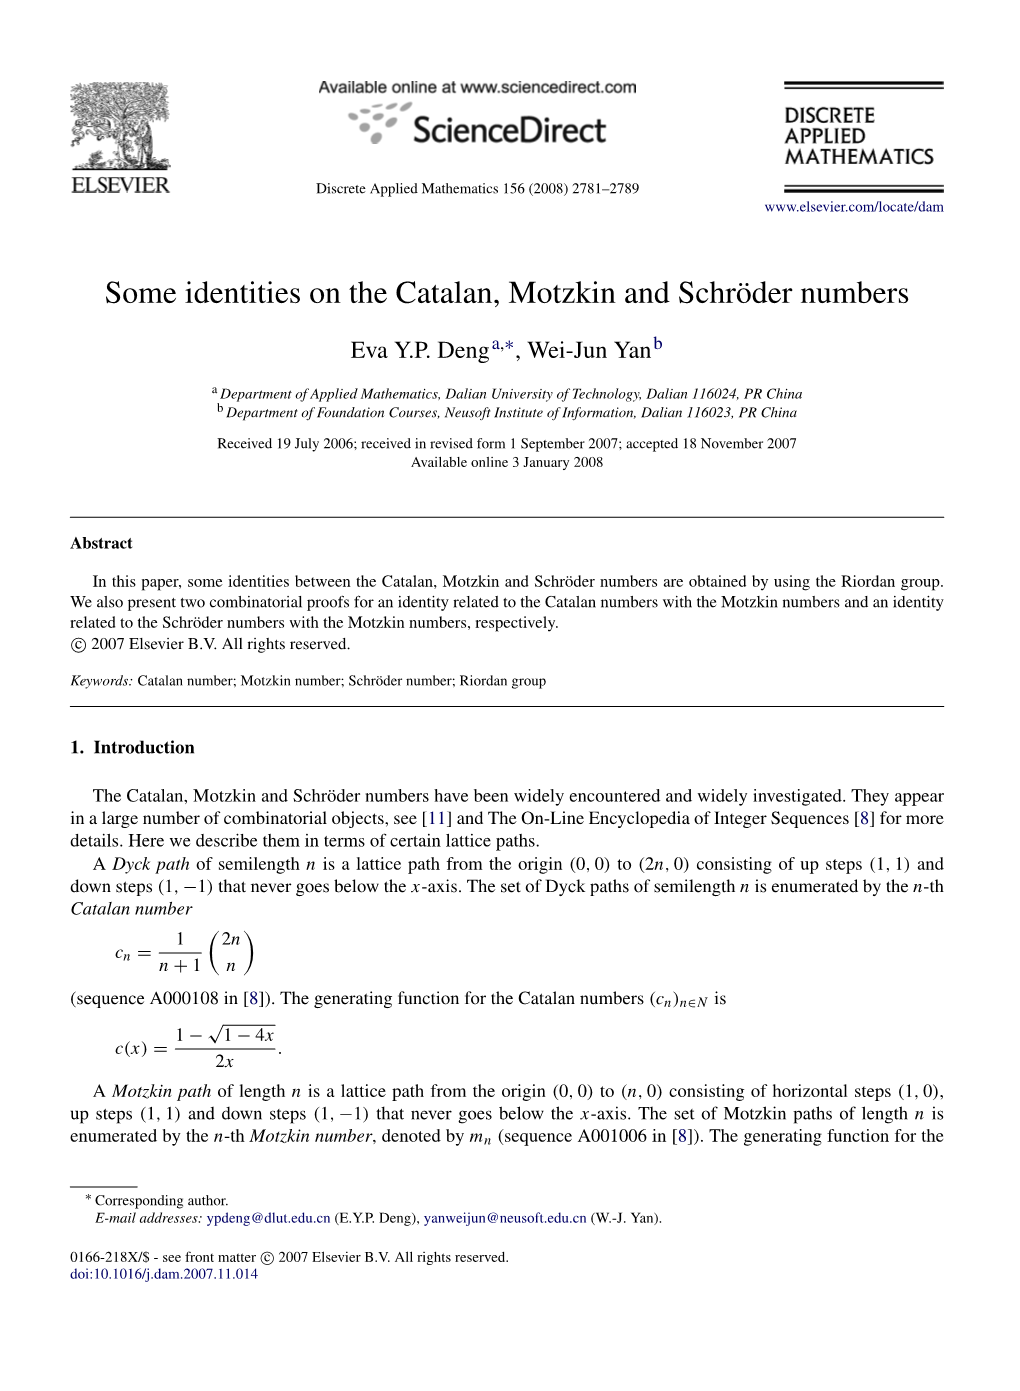 Some Identities on the Catalan, Motzkin and Schr¨Oder Numbers